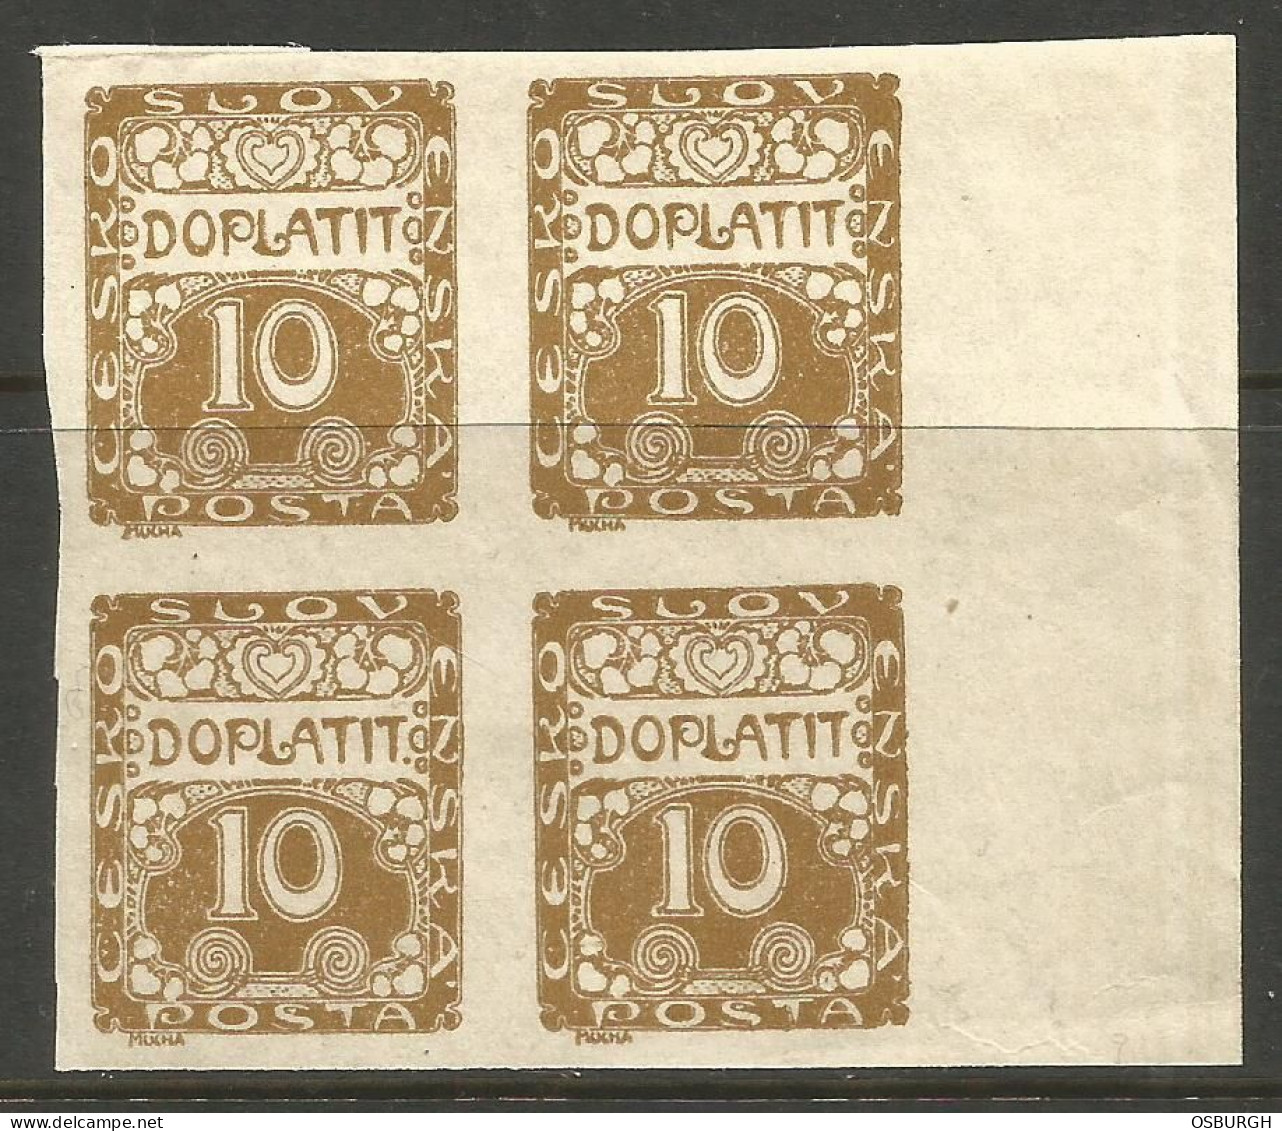 CZECHOSLOVAKIA. 10h IMPERF POSTAGE DUE MARGINAL BLOCK OF FOUR. MOUNTED MINT. - Postage Due